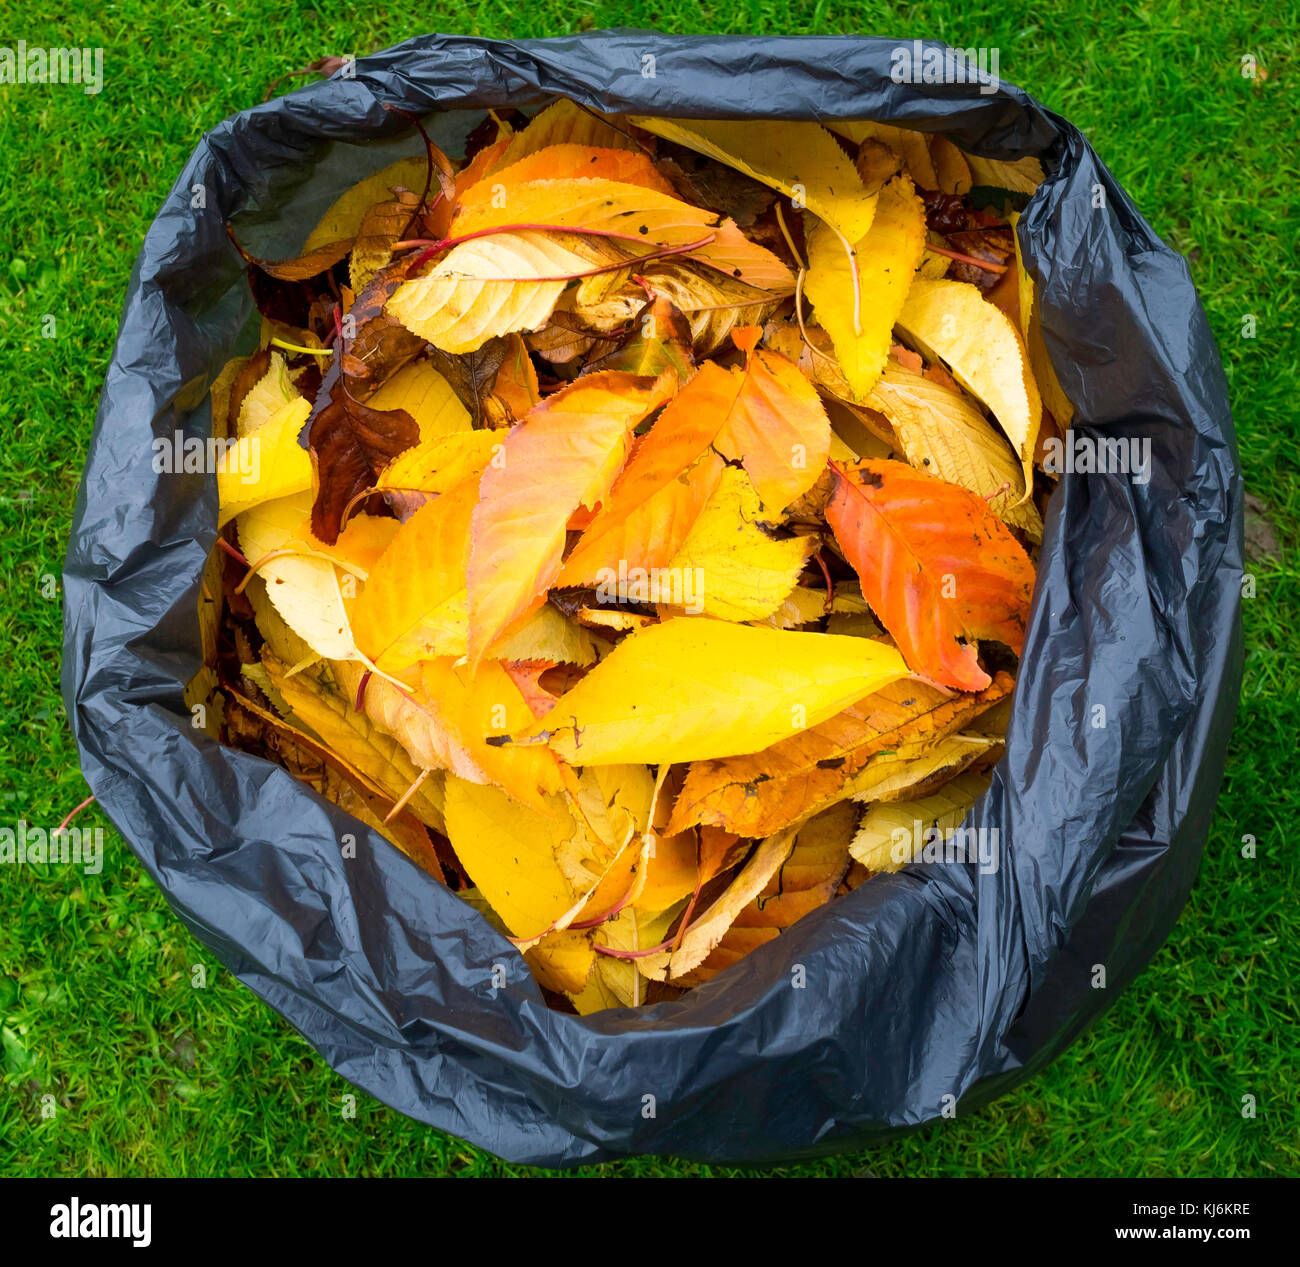 Black plastic bag filled with dead autumn leaves, which will decompose in the bag forming leaf mould a useful garden fertiliZer Stock Photo